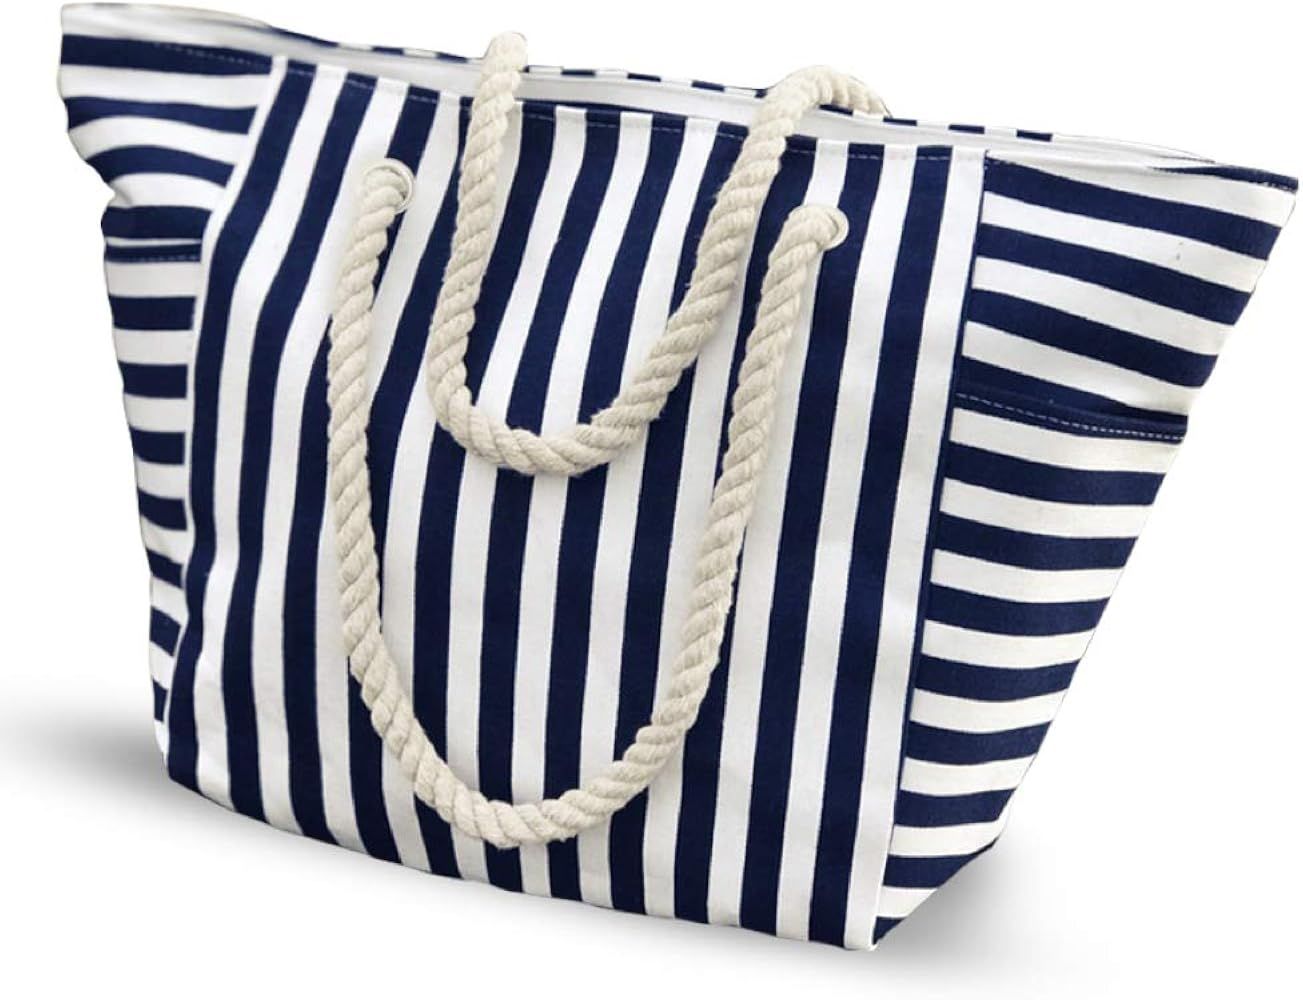 A Fashionable and modern Beach bag - Outer & inner pockets - Water-proof lining - The ideal tote ... | Amazon (US)